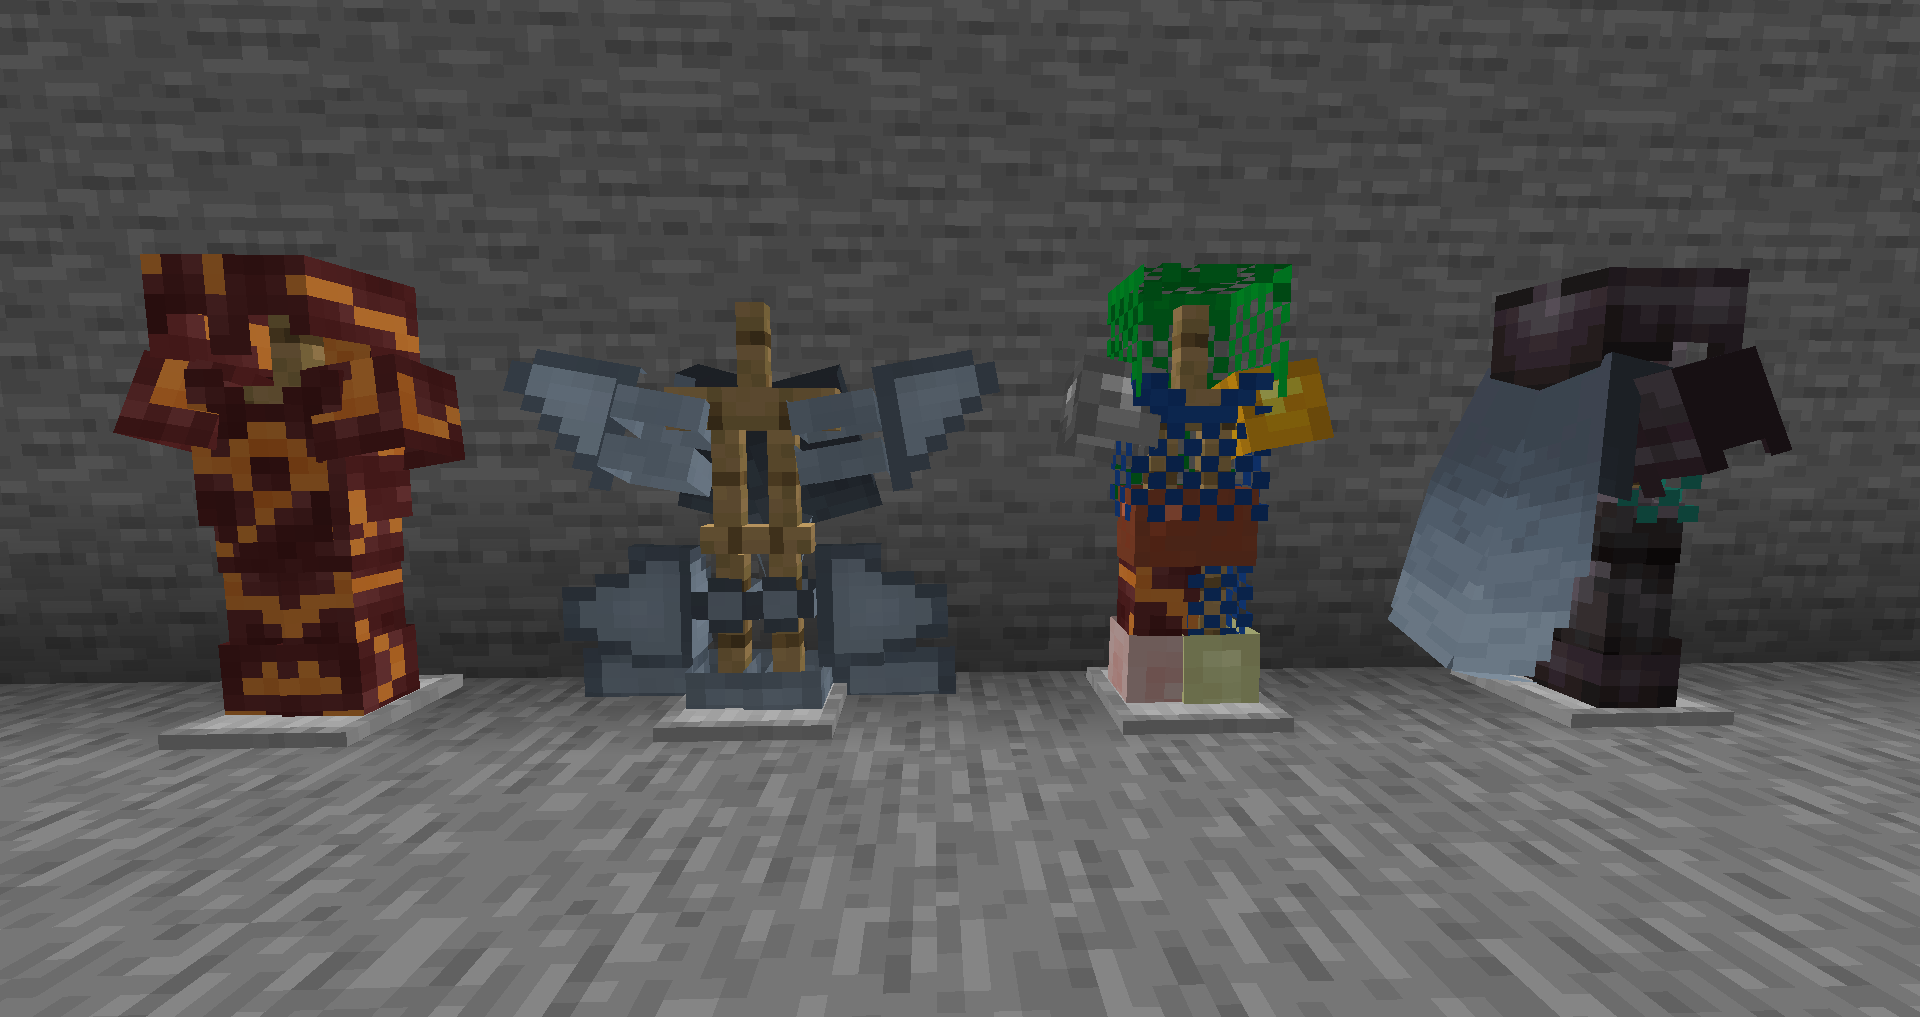 Some of the Armors